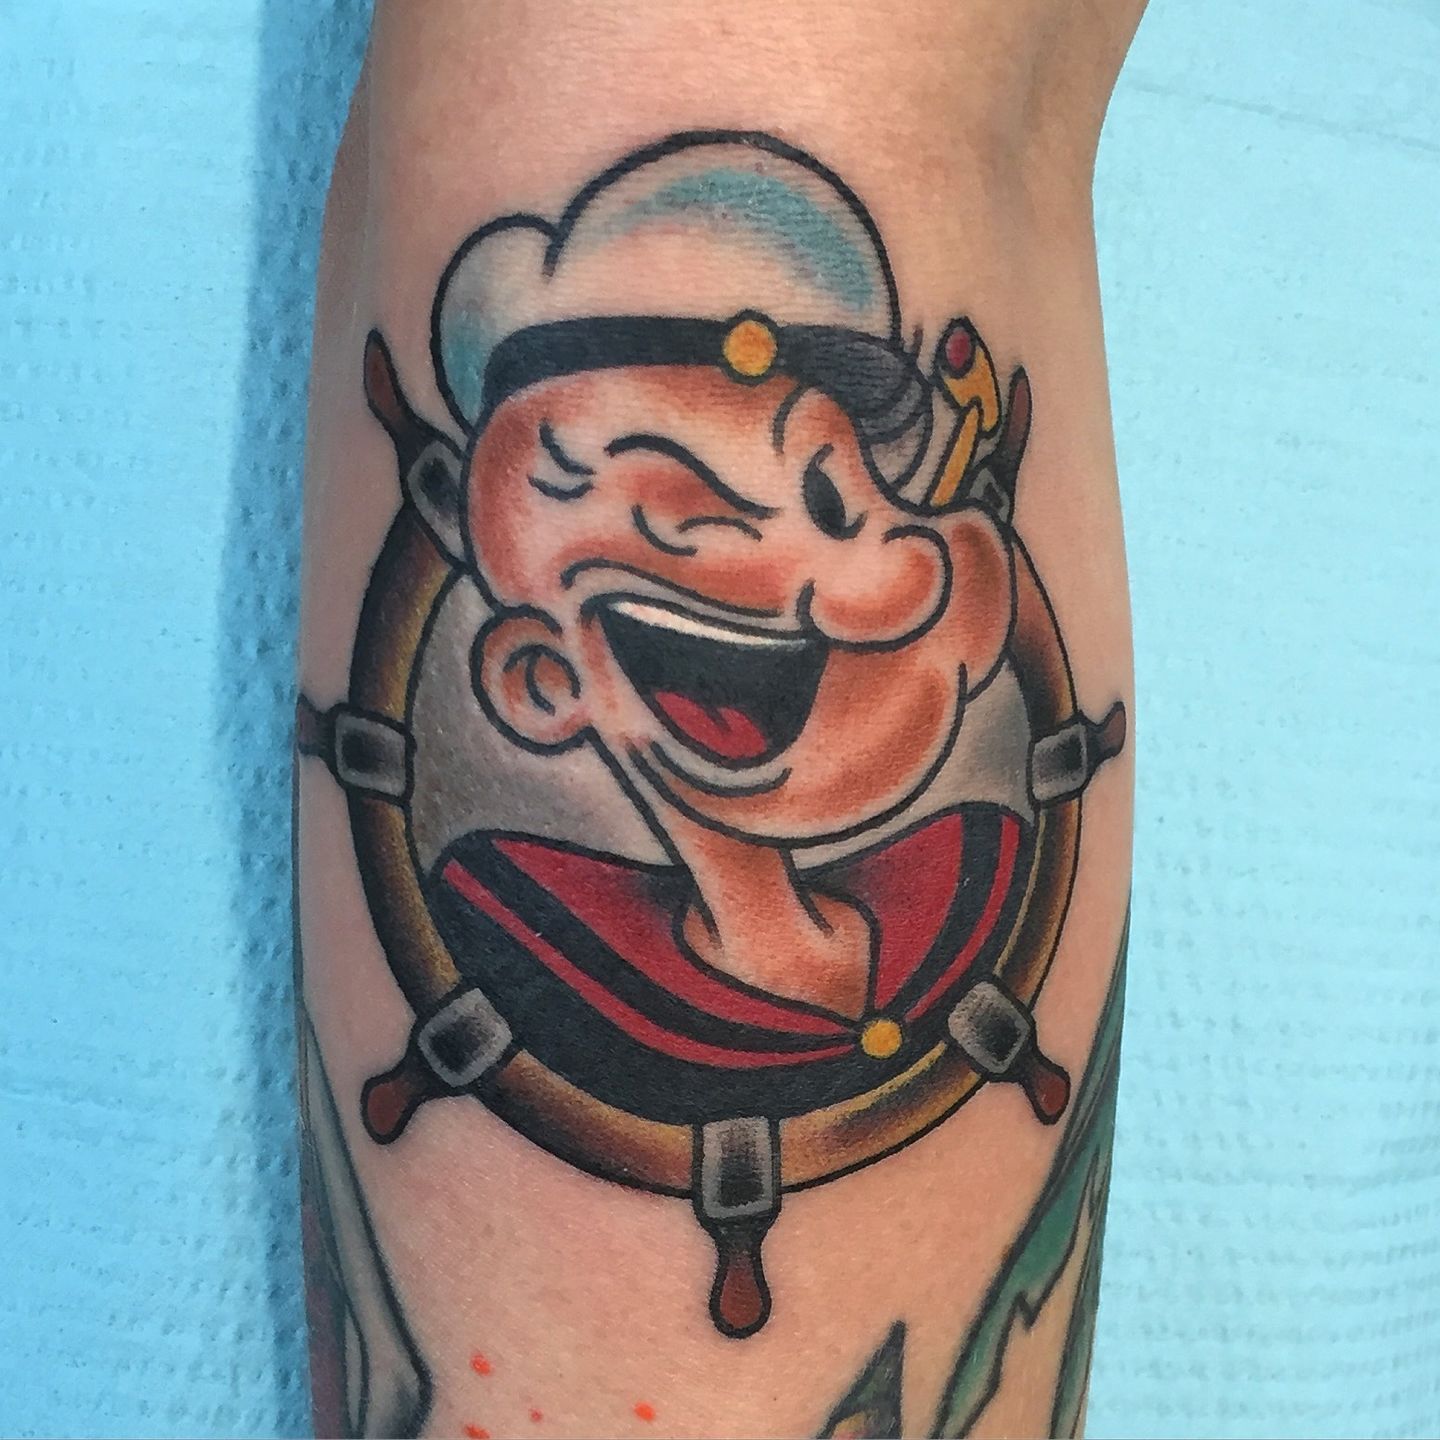 Popeye Day. Today is Popeye Day (January 17th). A… | by Casey Bell | Medium